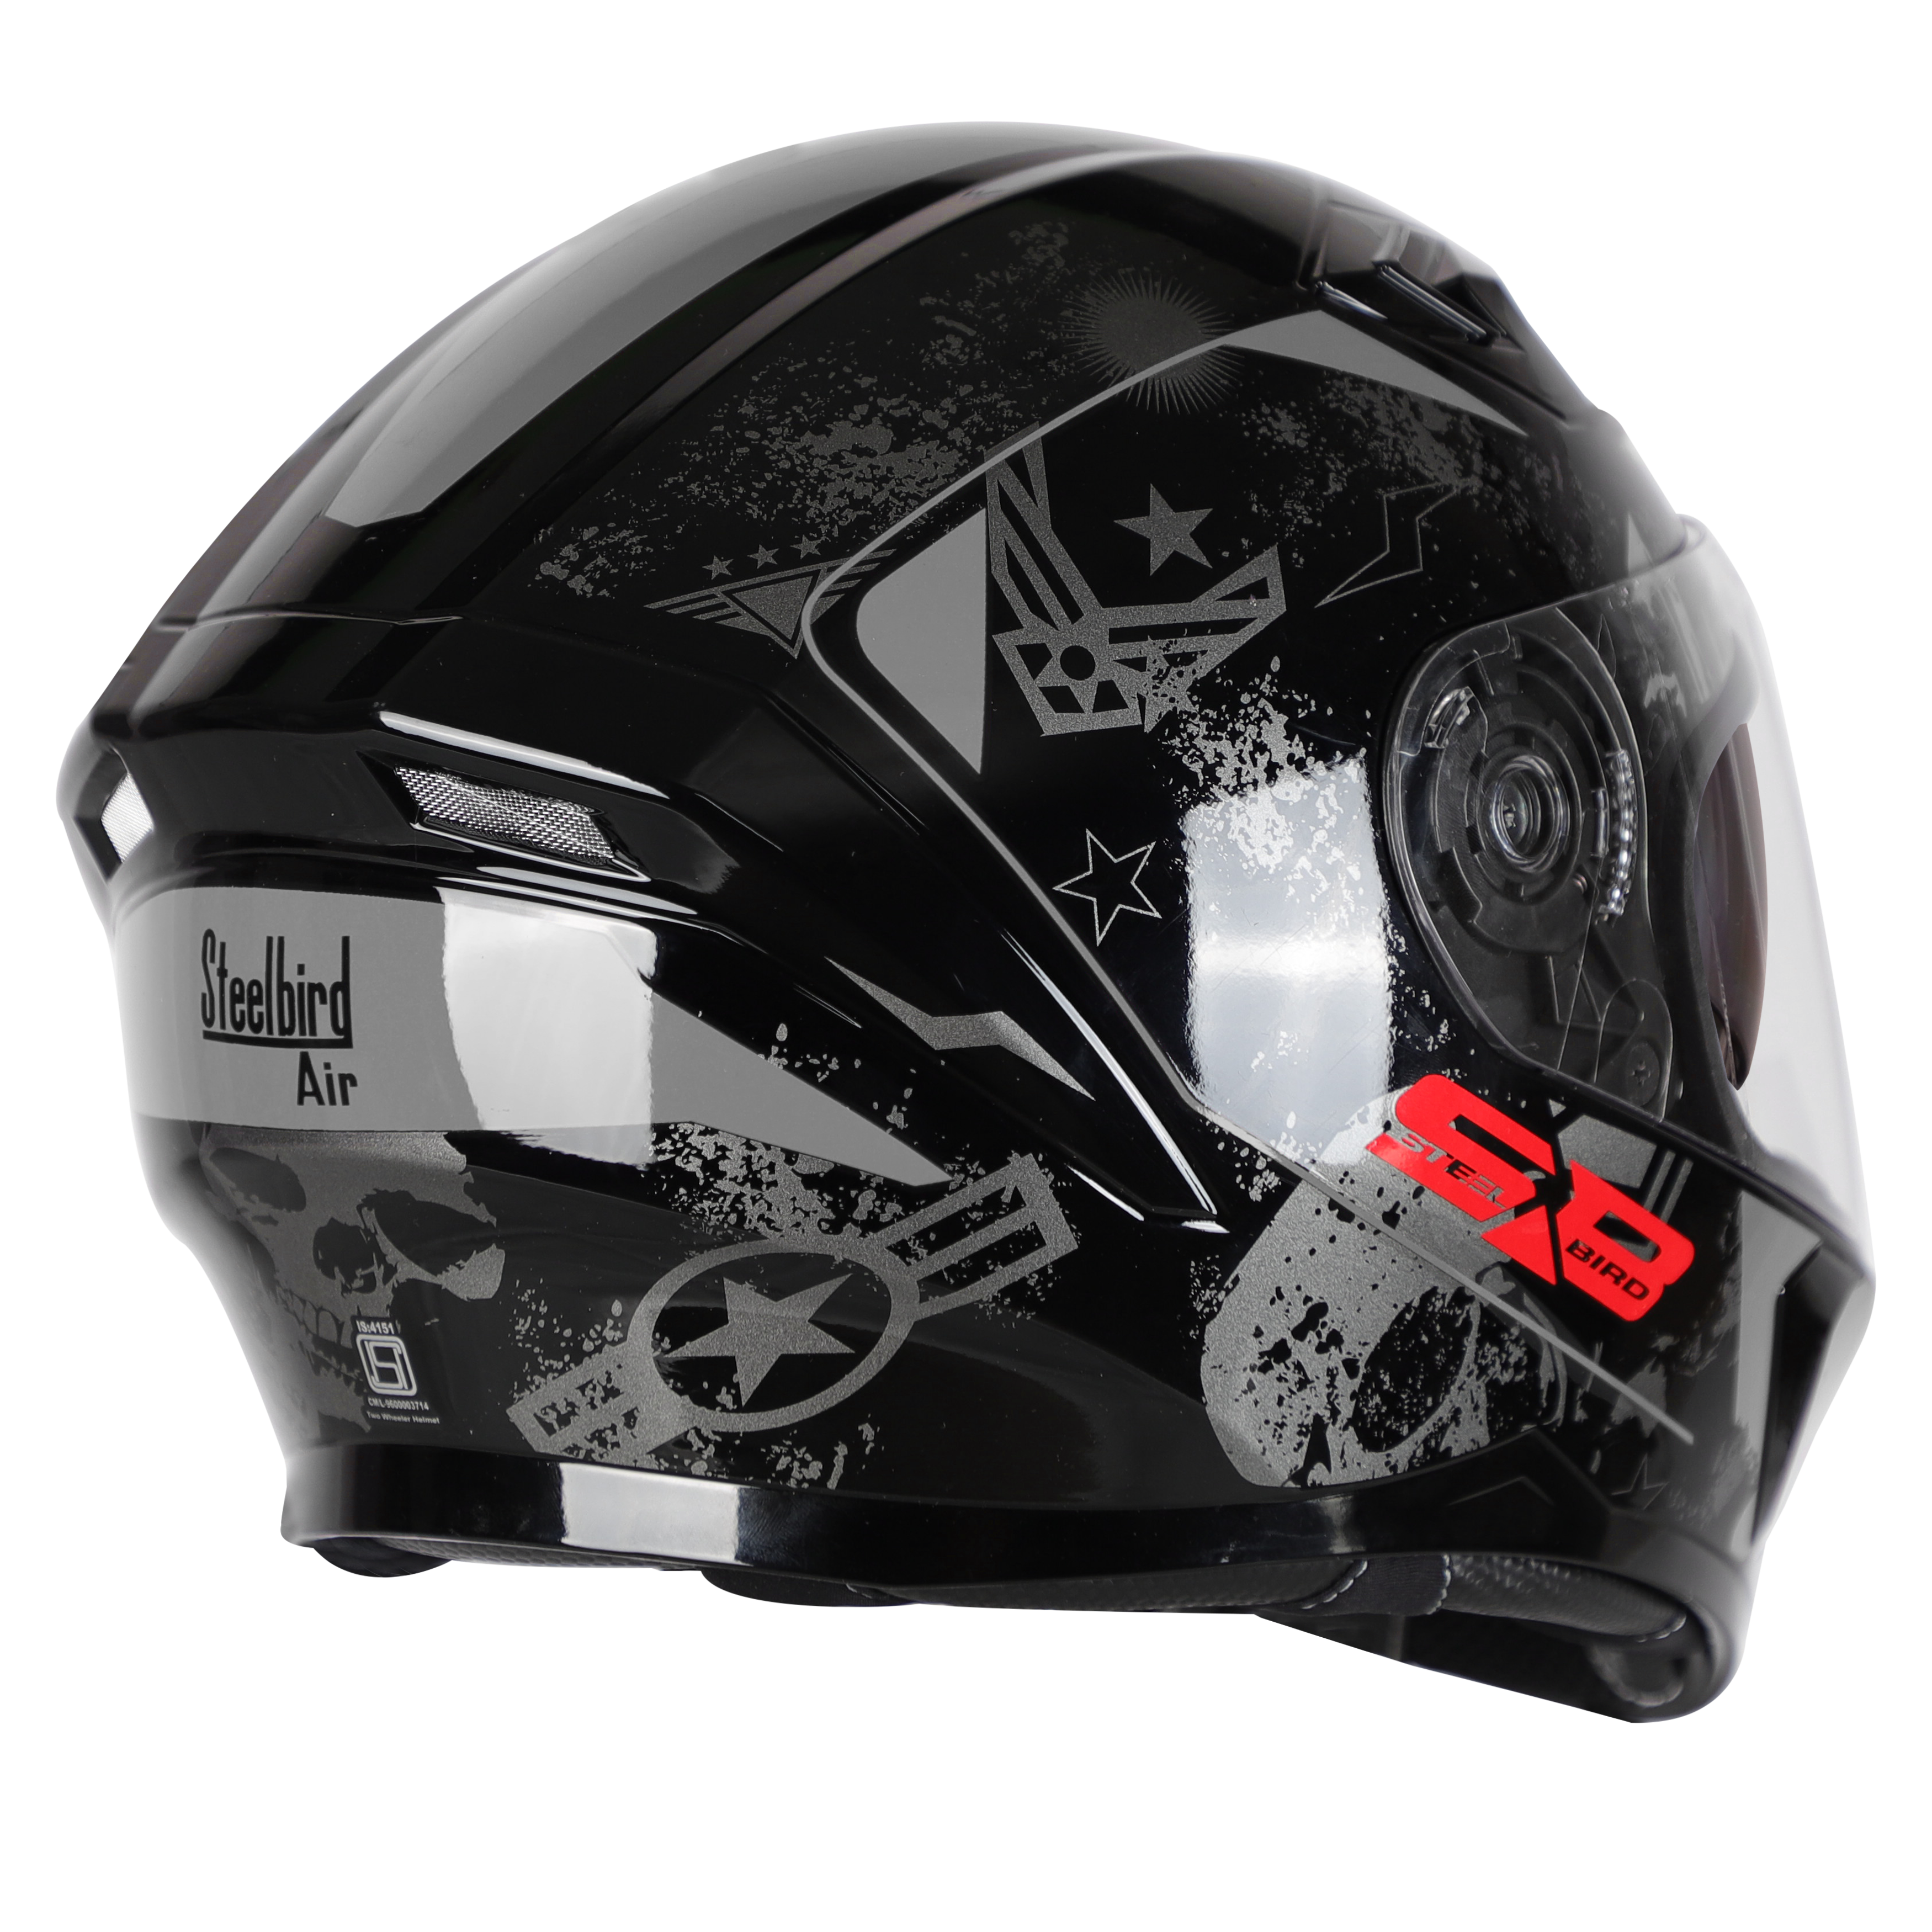 SBA-21 COMBAT GLOSSY BLACK WITH GREY (WITH IINNER SHIELD & HIGH-END INTERIOR)